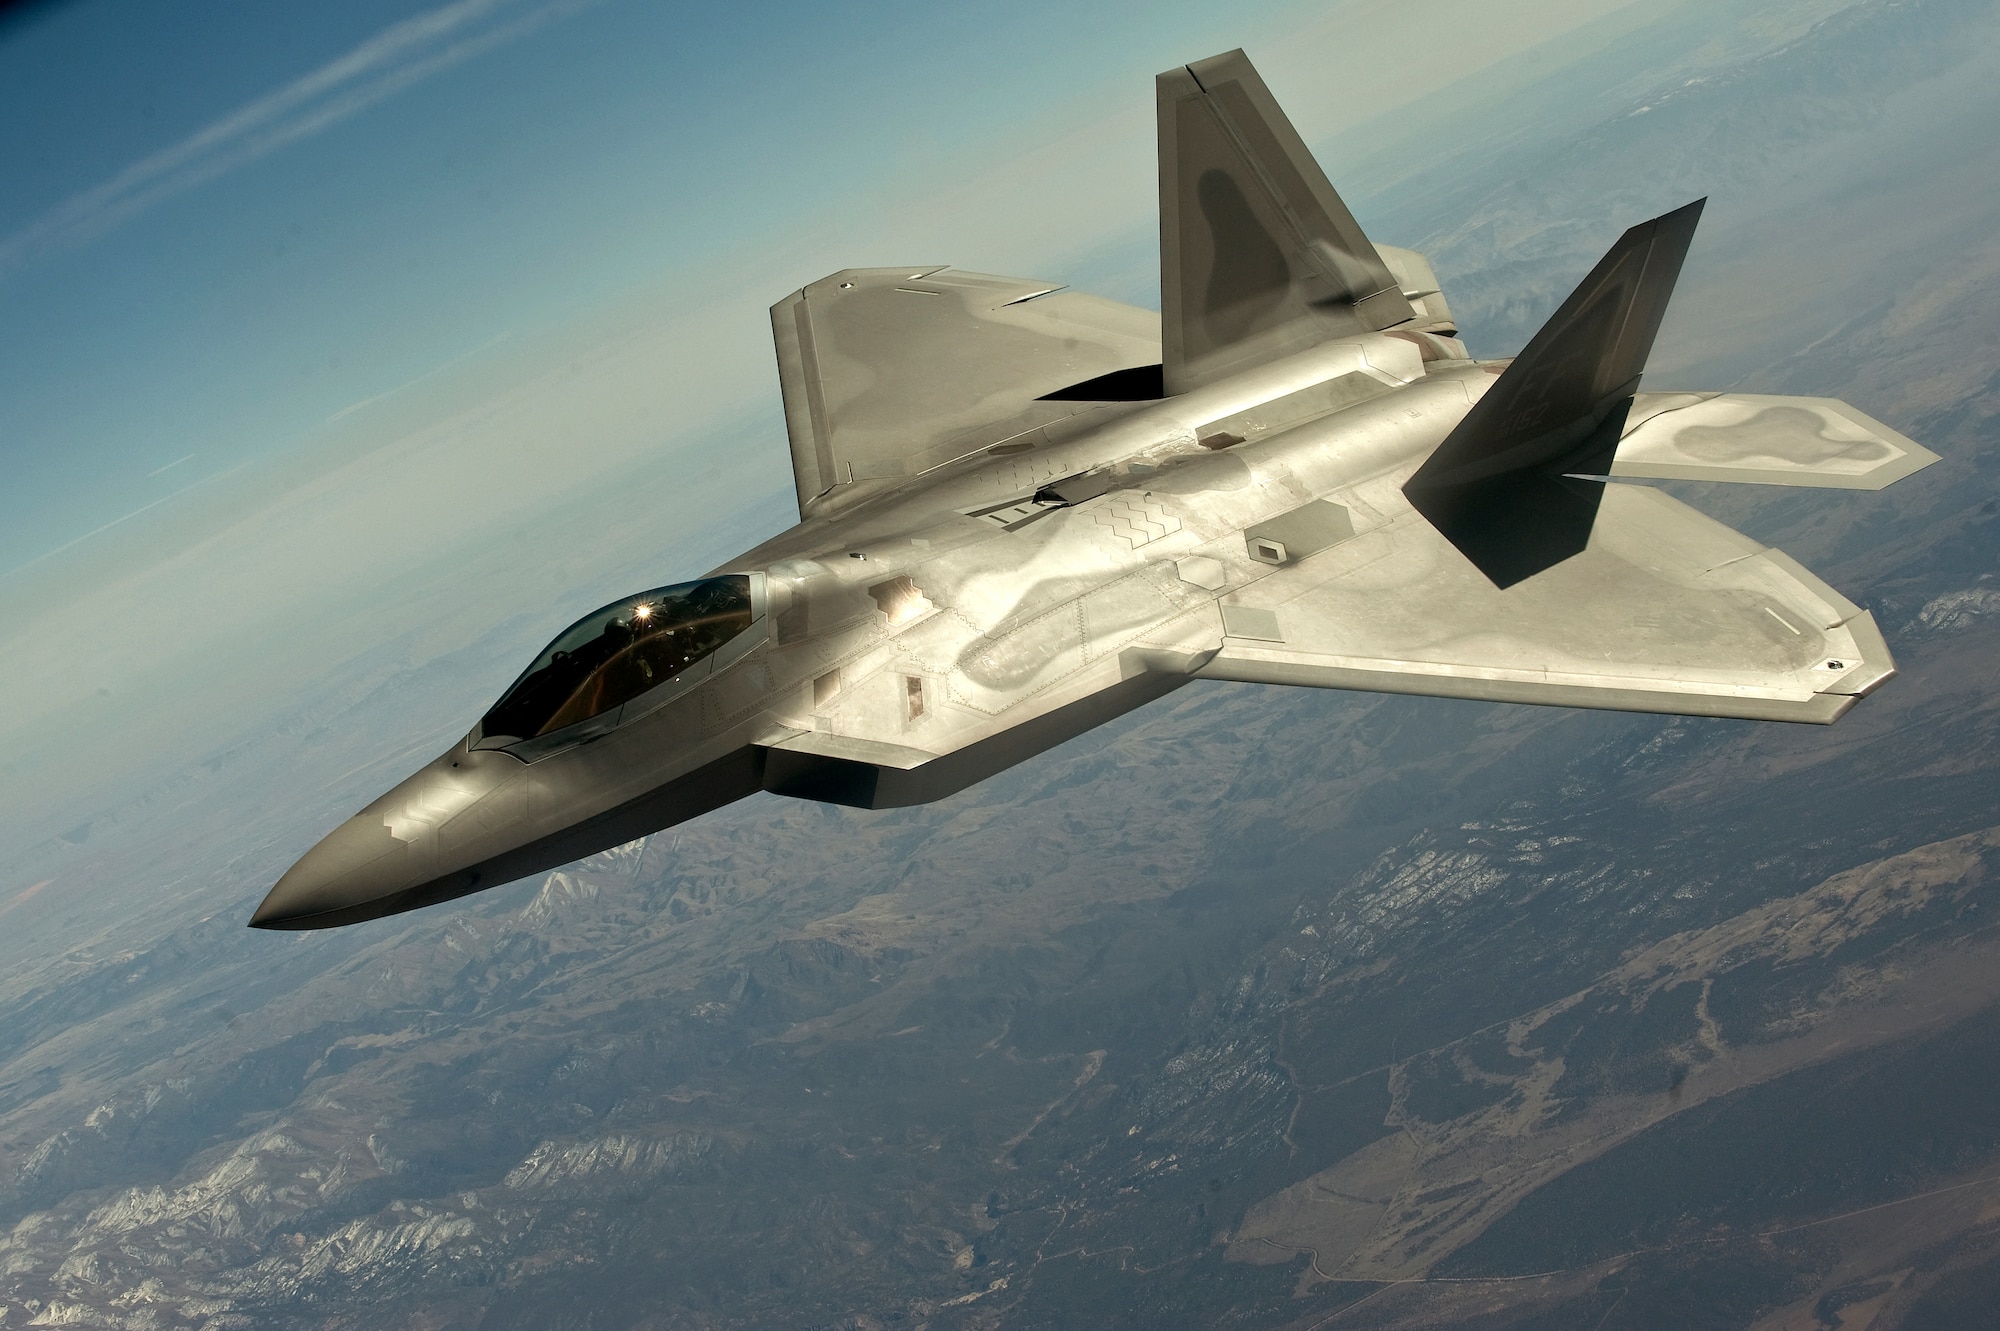 A U.S. Air Force F-22 Raptor, 1st Fighter Wing, Langley Air Force Base, Va., flies in a training mission during Red Flag 12-3 March 13, 2012, over the Nevada Test and Training Range. The exercise allows Airmen to experience intensive air combat operations in the safety of a training environment. (U.S. Air Force photo by Staff Sgt. Christopher Hubenthal)